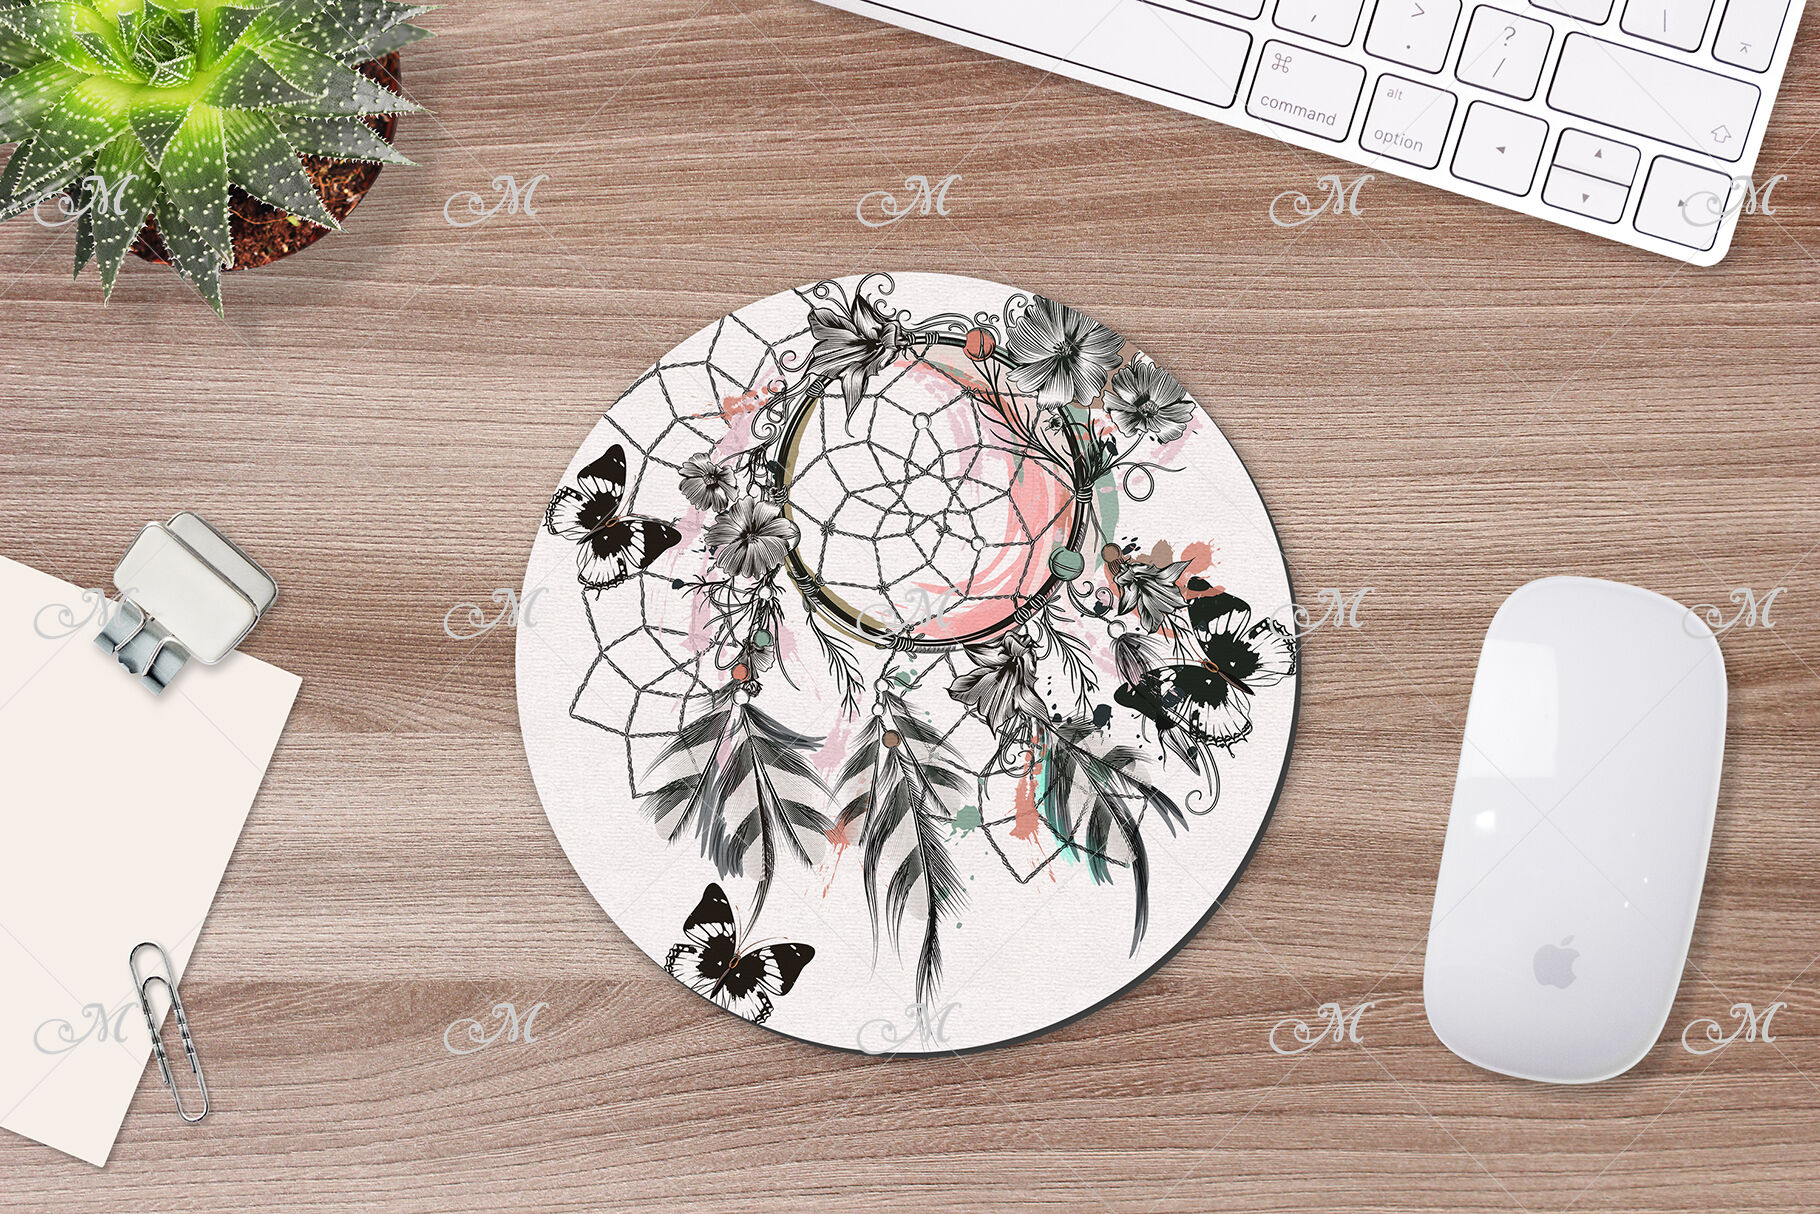 Mouse Pad Mockup 2-in-1. PSD JPEG By MaddyZ ...